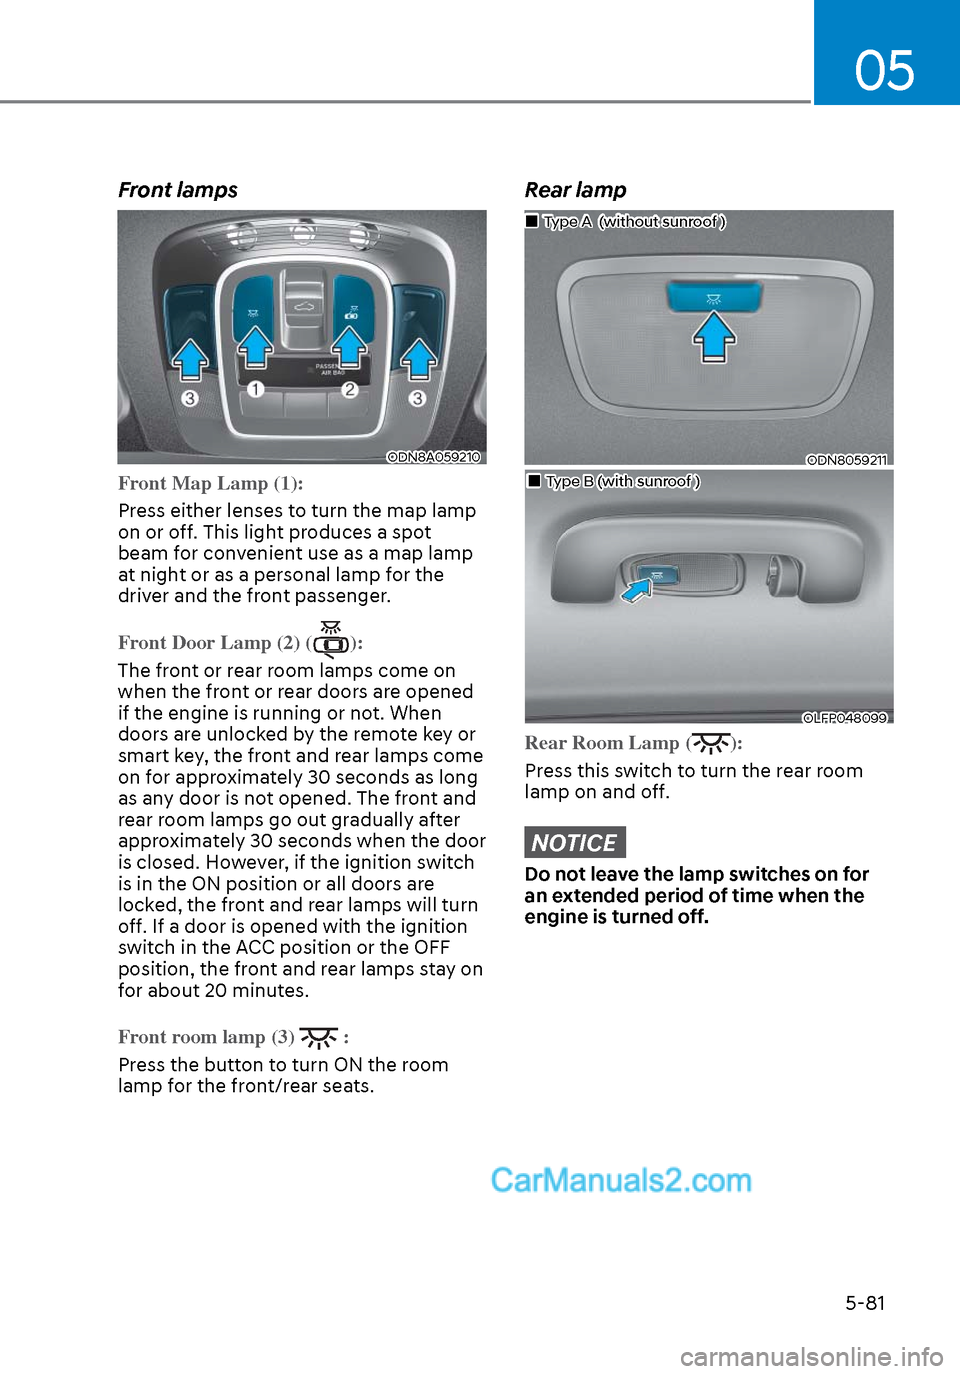 Hyundai Sonata 2020  Owners Manual 05
5-81
Front lamps
ODN8A059210ODN8A059210
Front Map Lamp (1):
Press either lenses to turn the map lamp 
on or o
ff. This light produces a spot 
beam for convenient use as a map lamp 
at night or as a